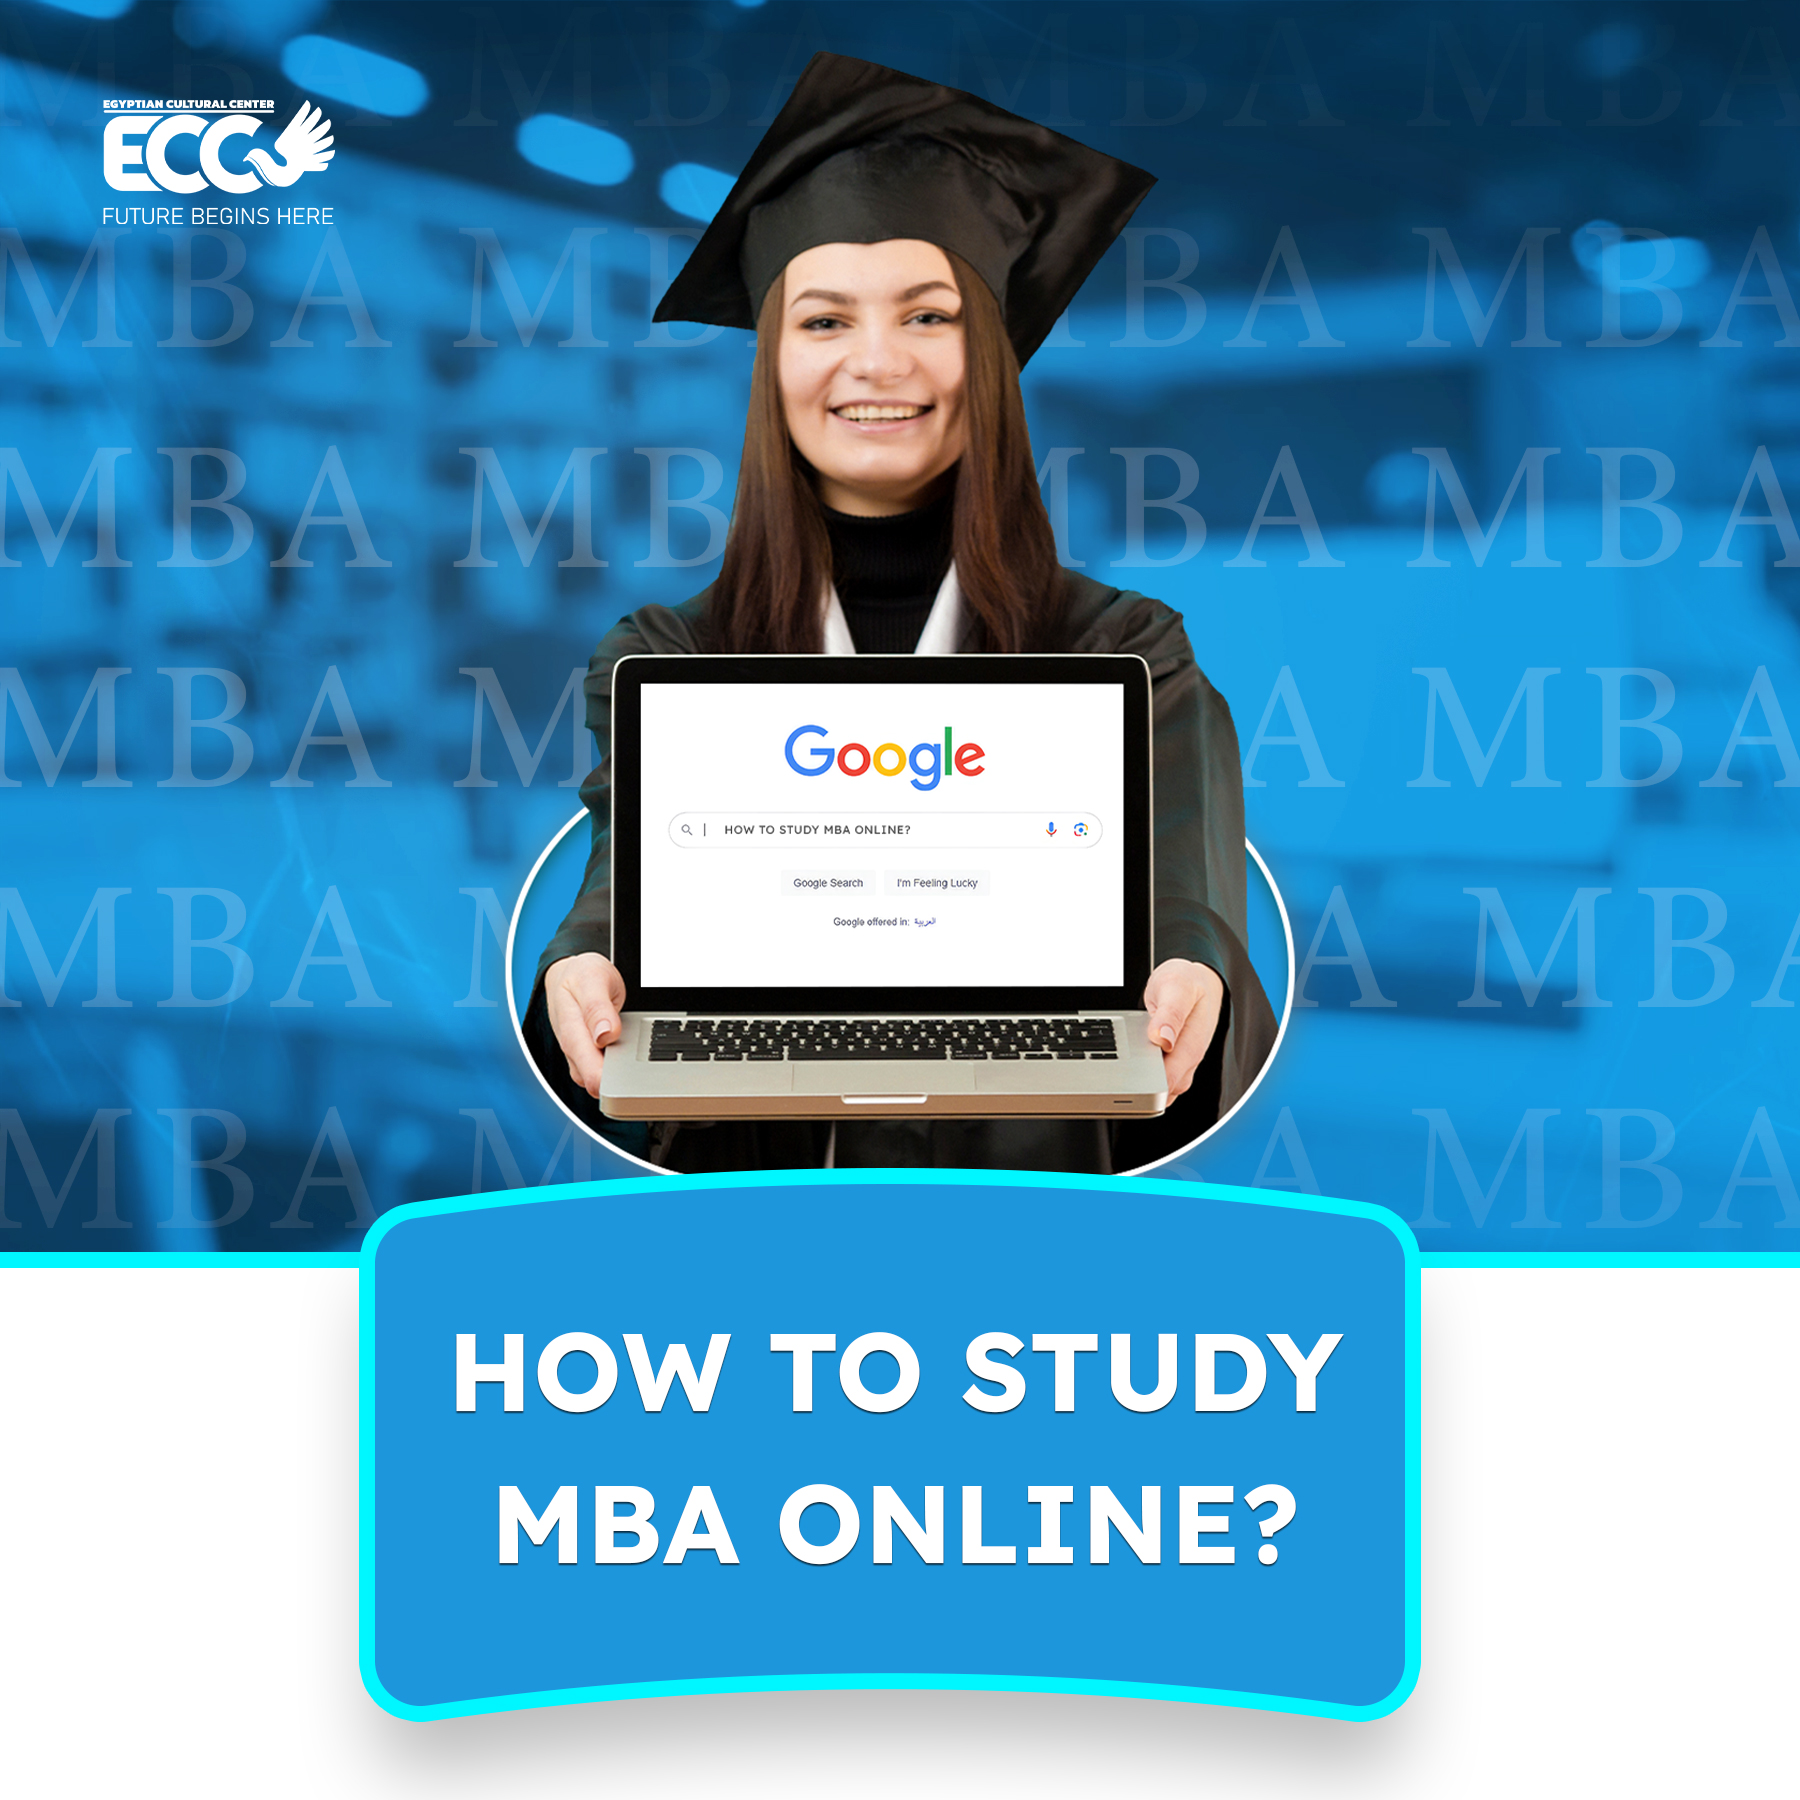 How to study MBA online